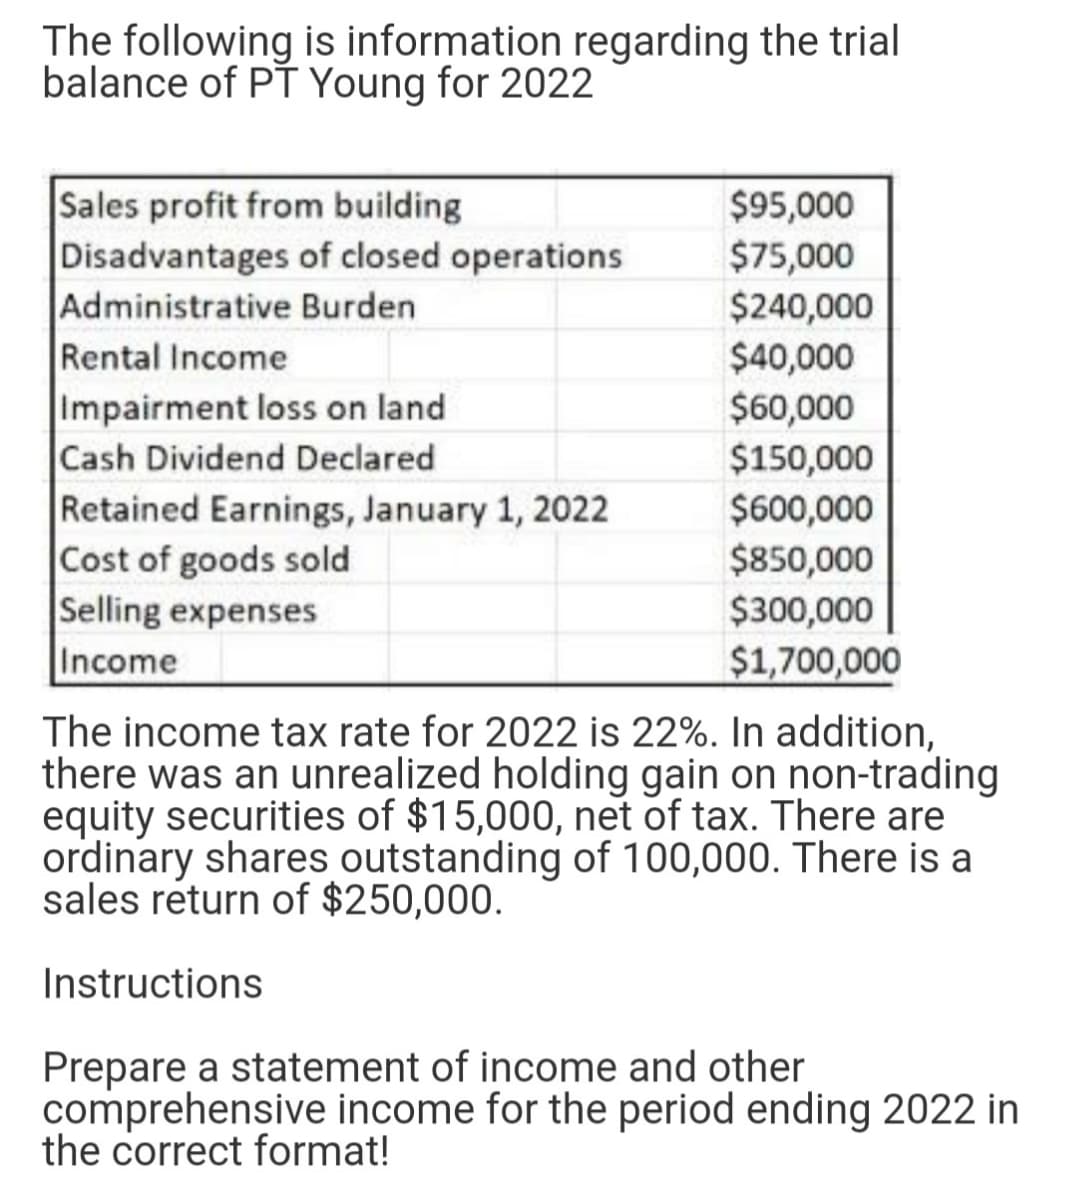 The following is information regarding the trial
balance of PT Young for 2022
Sales profit from building
Disadvantages of closed operations
Administrative Burden
Rental Income
Impairment loss on land
Cash Dividend Declared
Retained Earnings, January 1, 2022
Cost of goods sold
Selling expenses
Income
$95,000
$75,000
$240,000
$40,000
$60,000
$150,000
$600,000
$850,000
$300,000
$1,700,000
The income tax rate for 2022 is 22%. In addition,
there was an unrealized holding gain on non-trading
equity securities of $15,000, net of tax. There are
ordinary shares outstanding of 100,000. There is a
sales return of $250,000.
Instructions
Prepare a statement of income and other
comprehensive income for the period ending 2022 in
the correct format!
